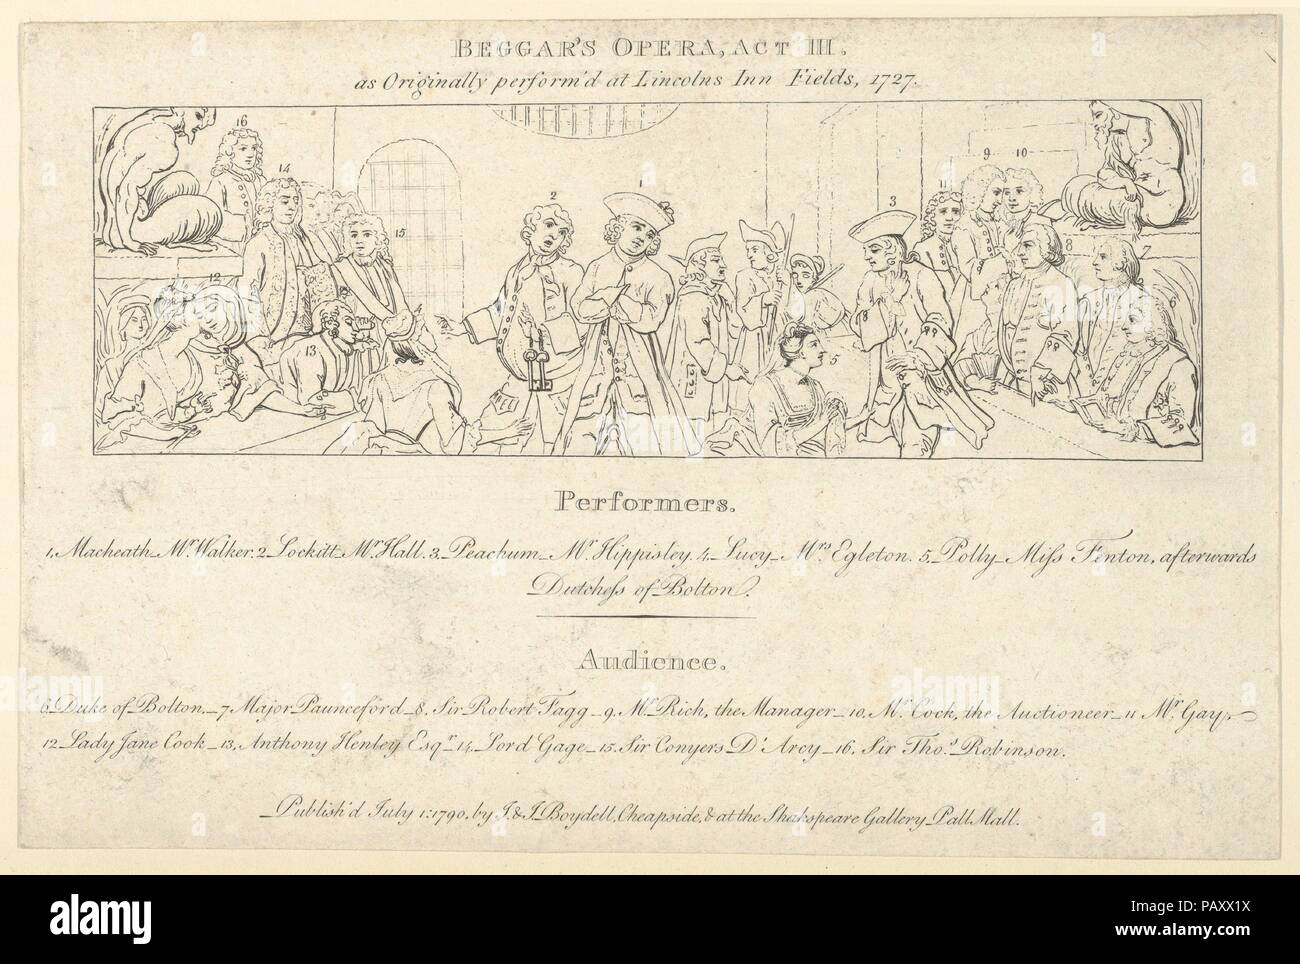 Key with List of Performers and Audience to: The Beggars Opera. Artist: After William Hogarth (British, London 1697-1764 London). Author: Illustrates John Gay (British, Barnstaple, Devon 1685-1732). Dimensions: Sheet: 5 13/16 x 8 11/16 in. (14.7 x 22 cm). Publisher: John & Josiah Boydell (British, 1786-1804). Date: July 1, 1790. Museum: Metropolitan Museum of Art, New York, USA. Stock Photo